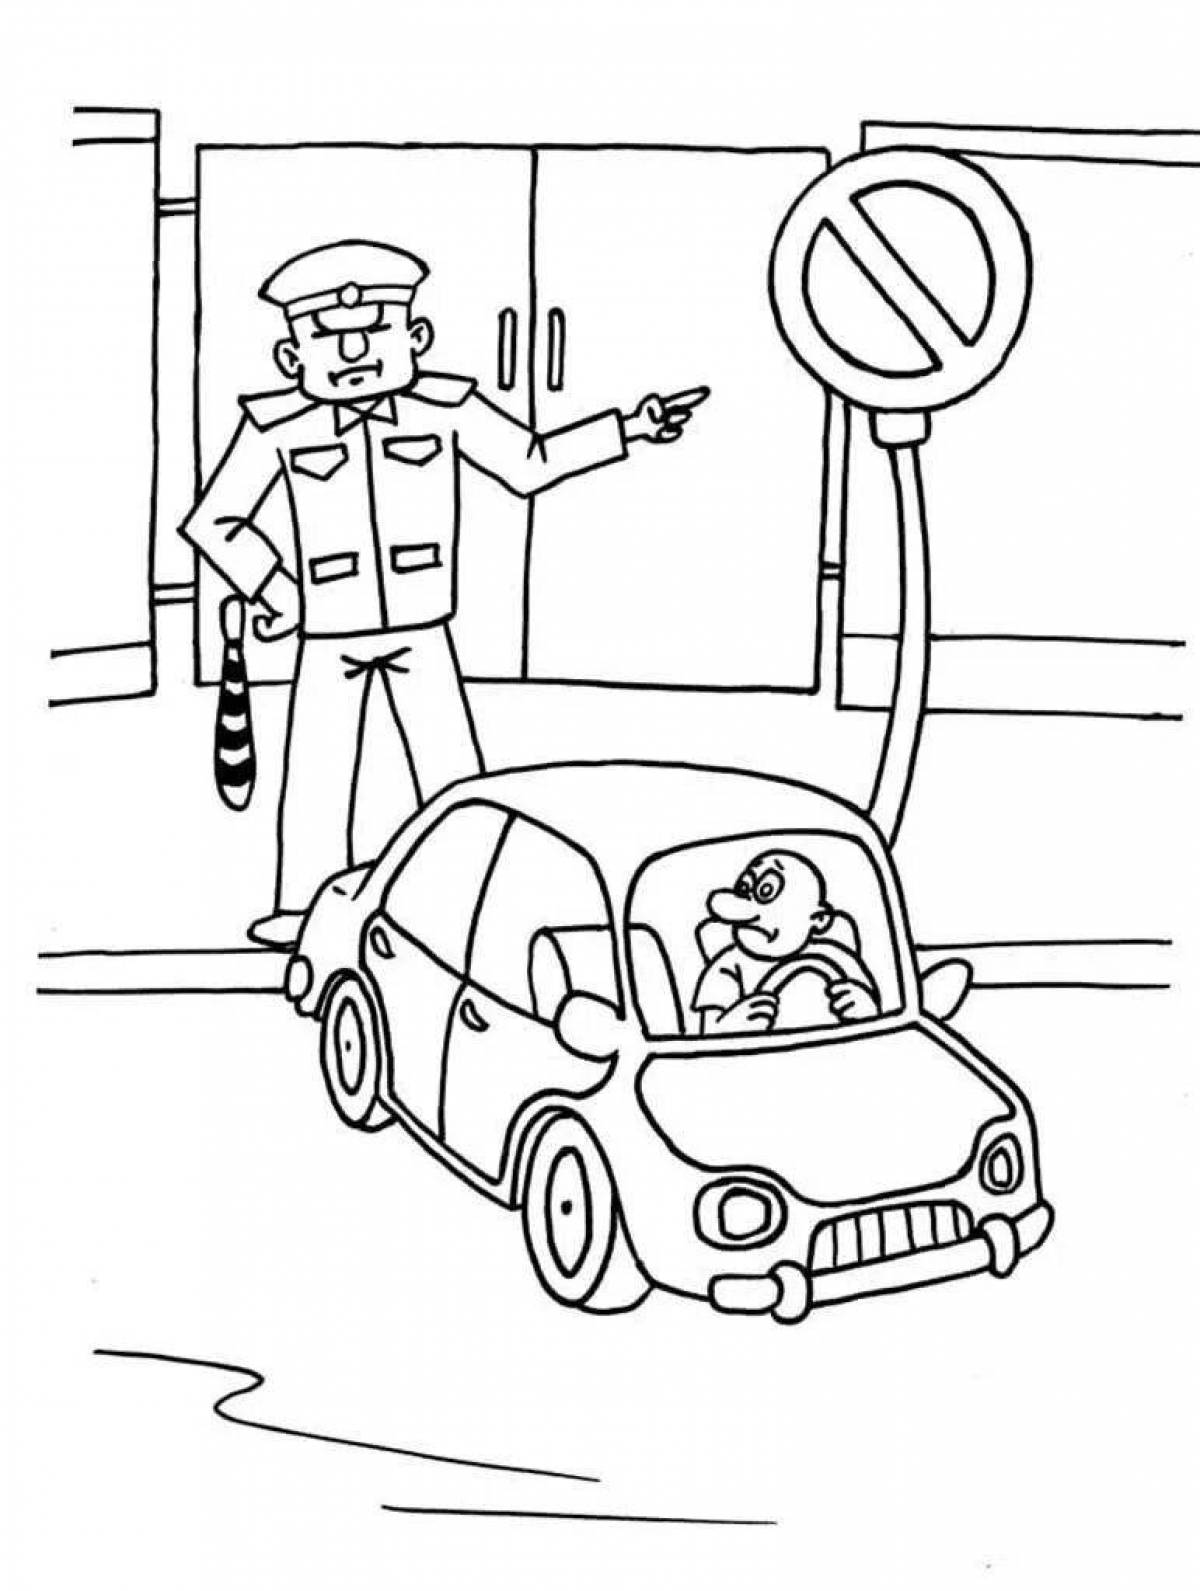 Traffic coloring book for the little ones